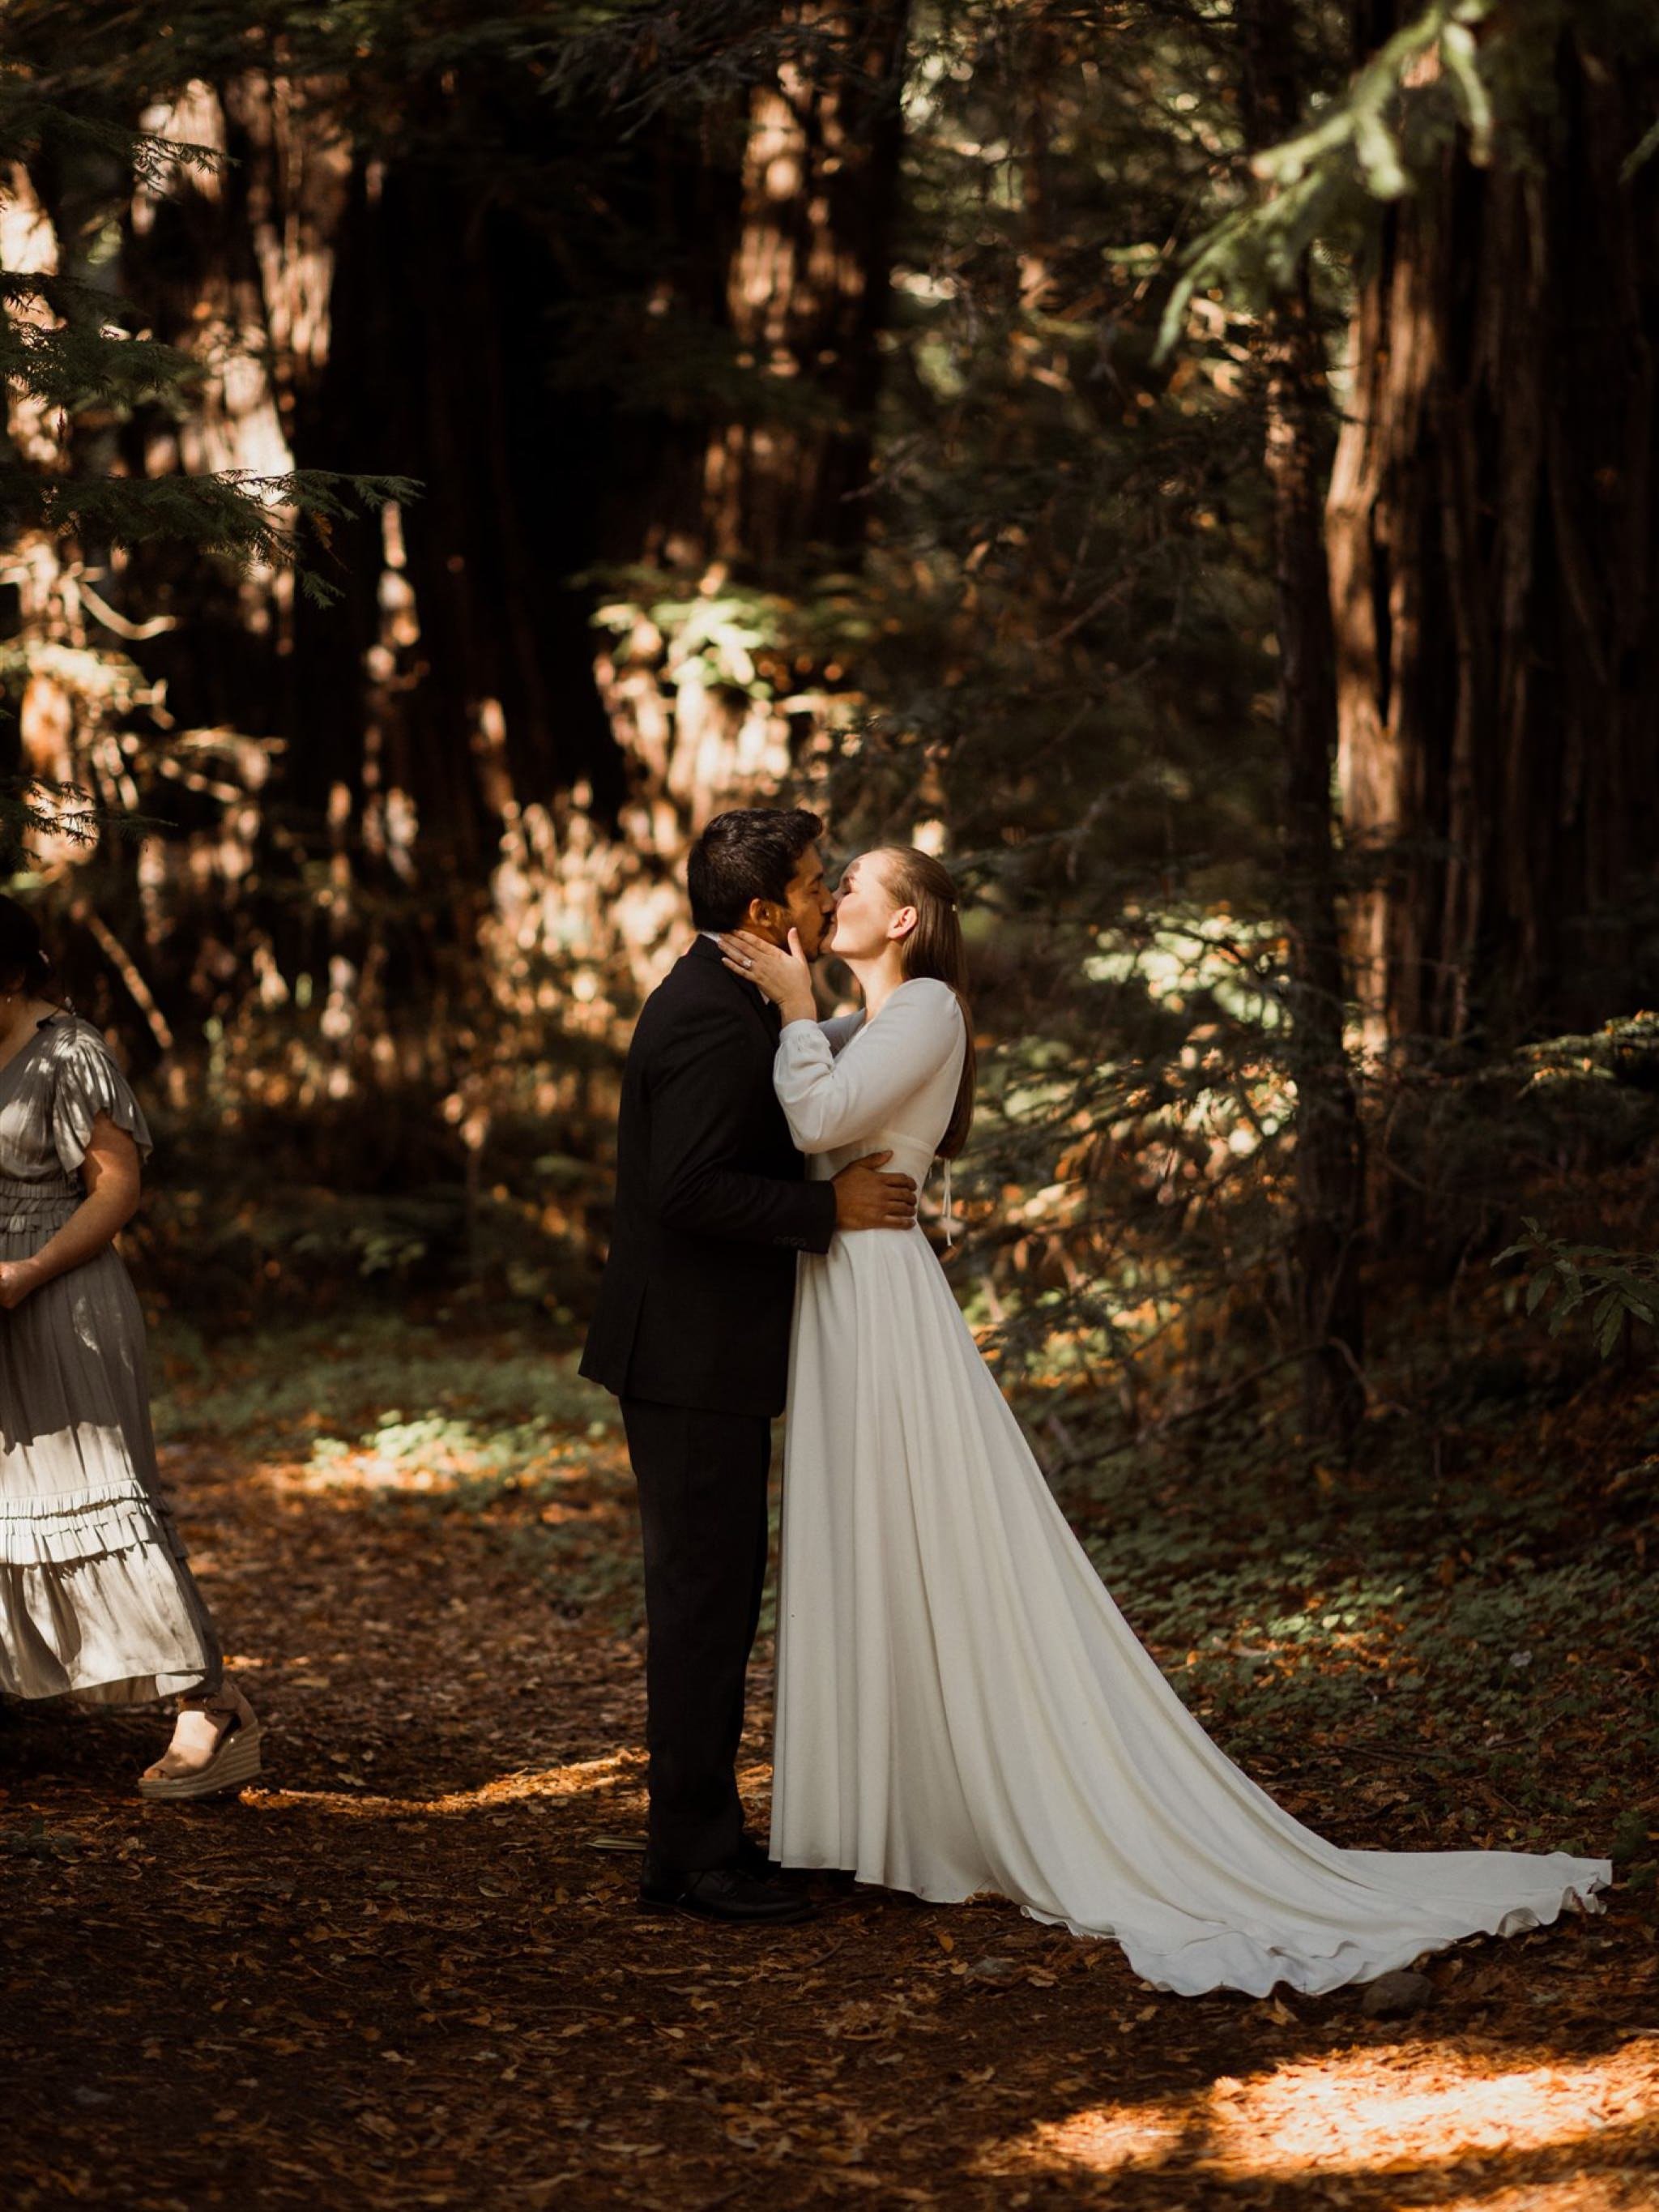 046_Two-Day Big Sur Redwoods Elopement with Family_Will Khoury Elopement Photographer.jpg